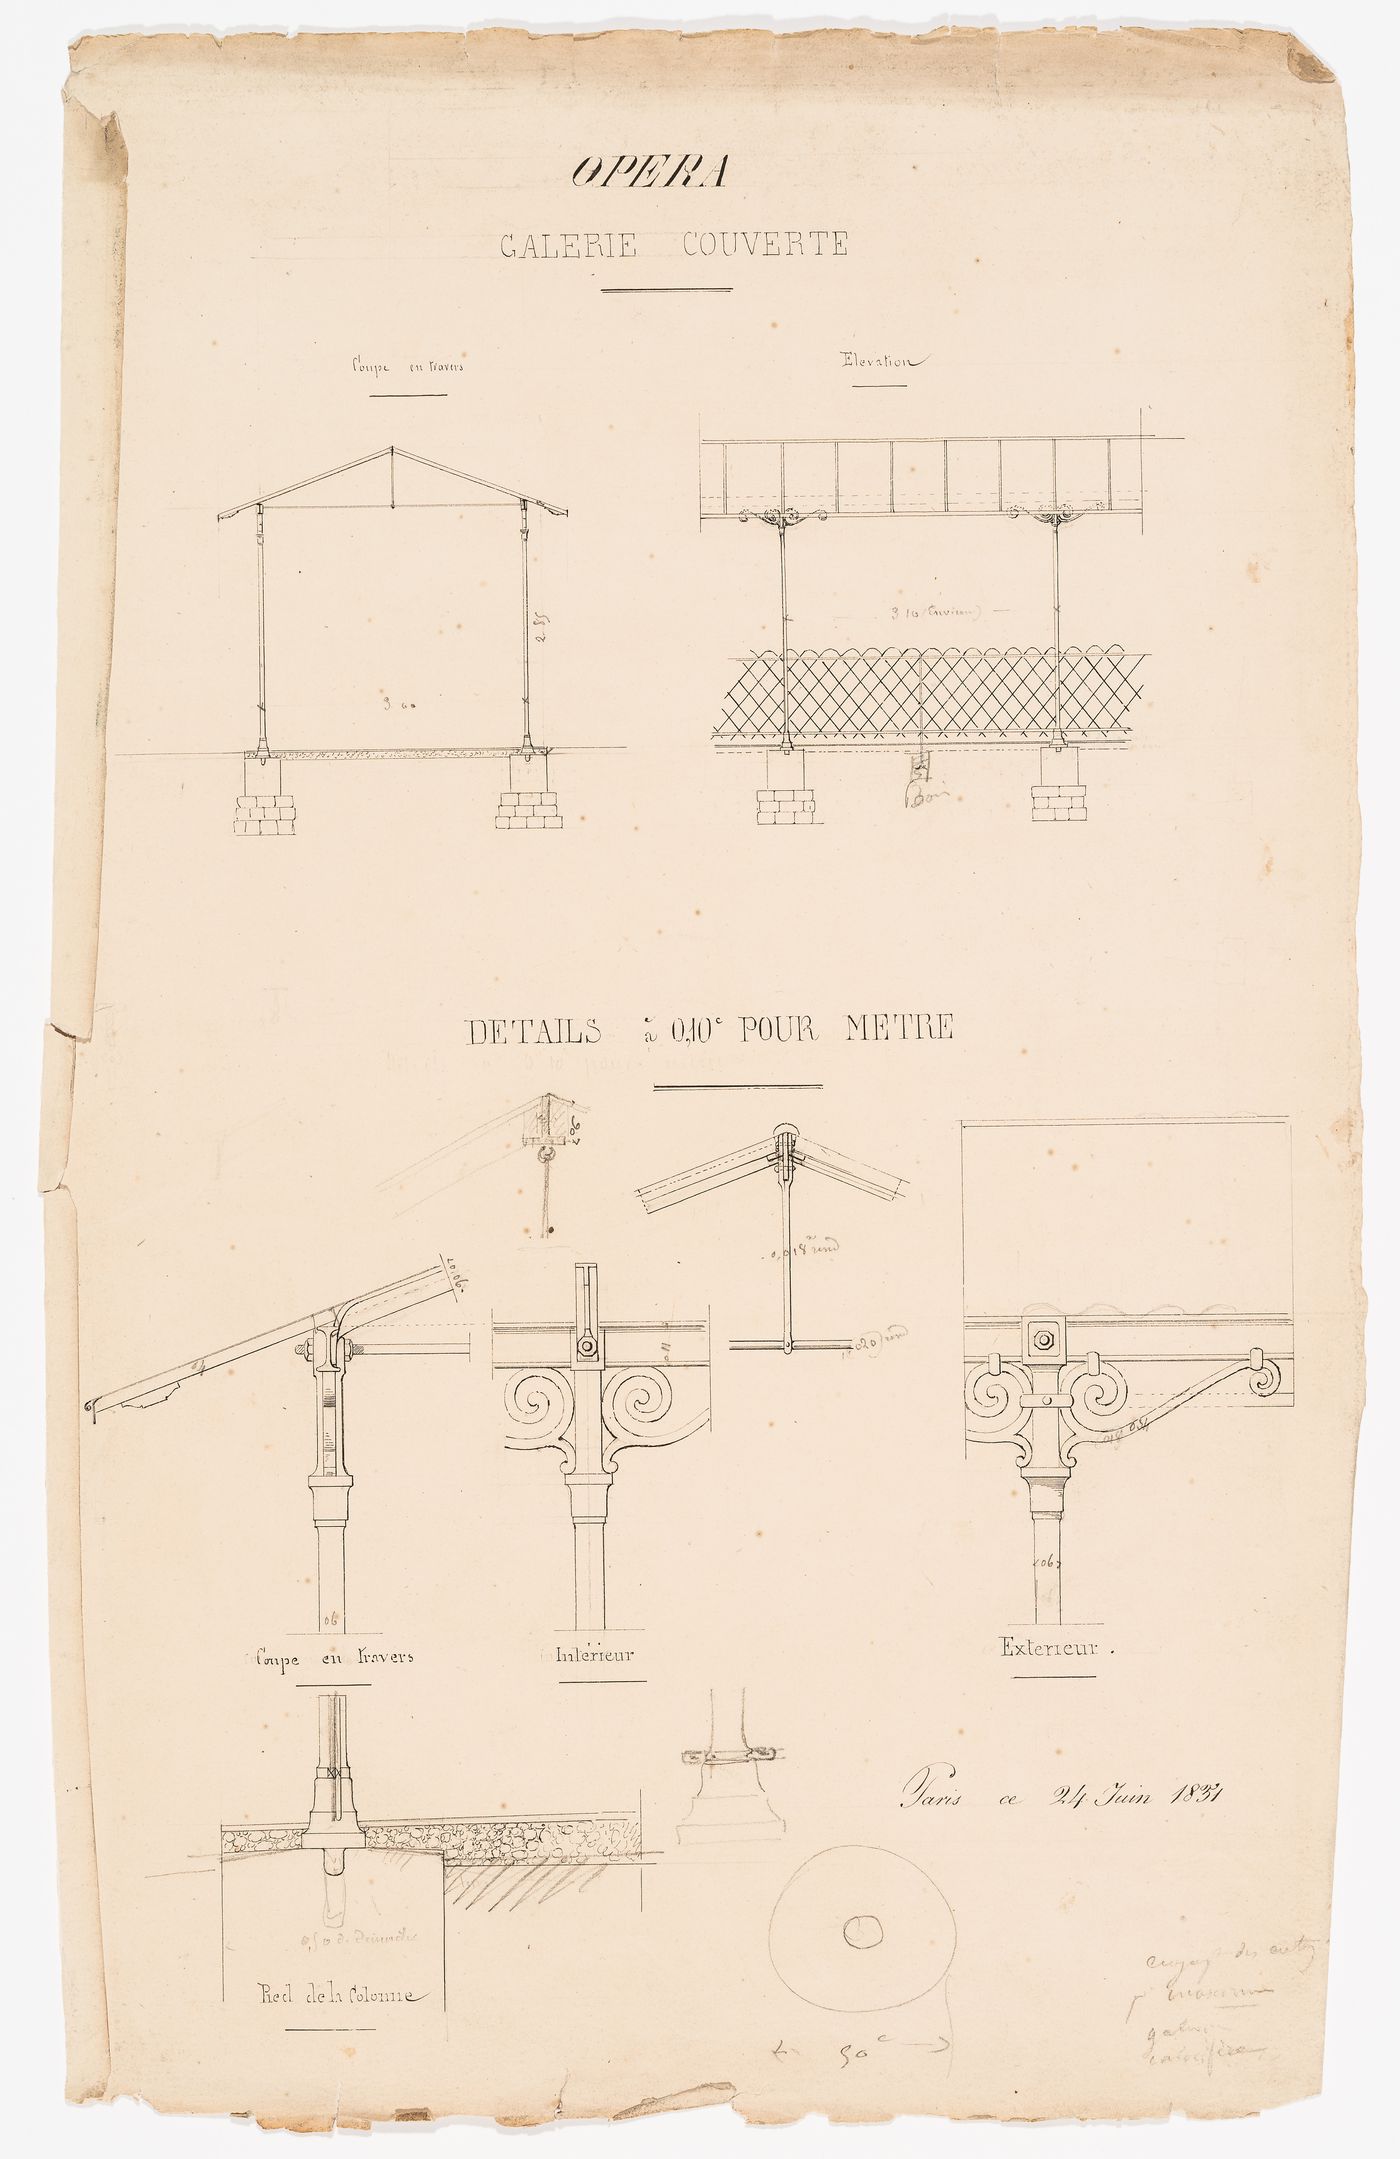 Elevation, section, and details for a covered gallery, probably for Salle Le Peletier